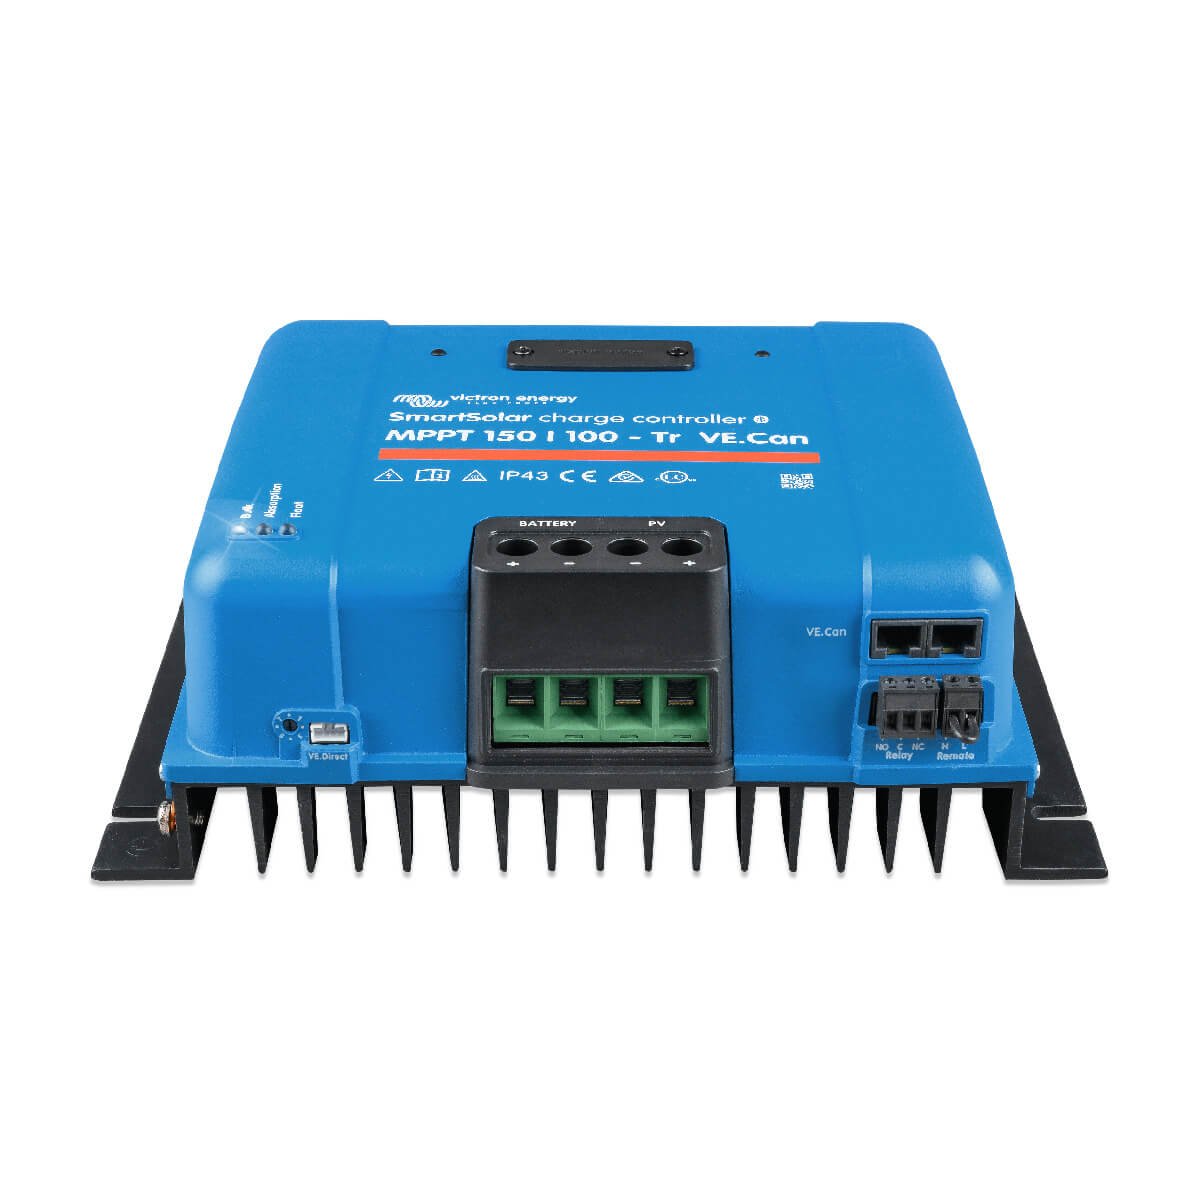 The Victron MPPT 150/100 - SmartSolar Charge Controller - Tr VE.Can (12/24V or 48V), with its multiple ports and connectors, is meticulously designed for solar energy systems.